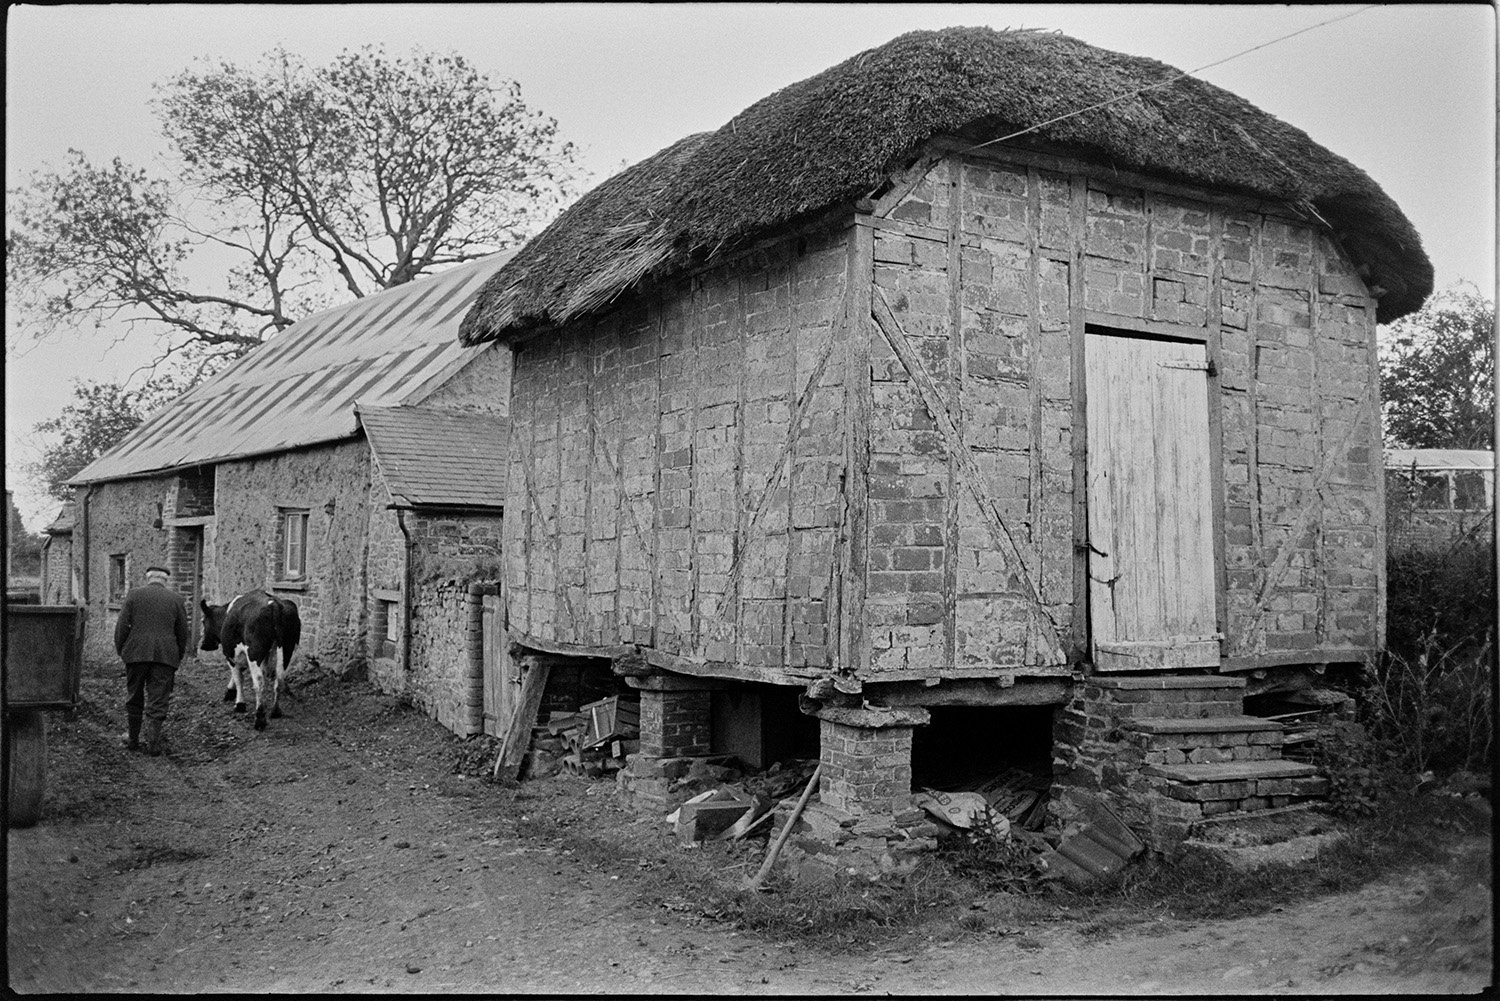 Thatched brick granary with timber frame standing on brick pillars. 
[A timber framed thatched, brick granary building in the farmyard at Higher House, Atherington. The granary is on brick pillars. Mr Wescott is herding a cow past the granary and another barn in the background.]